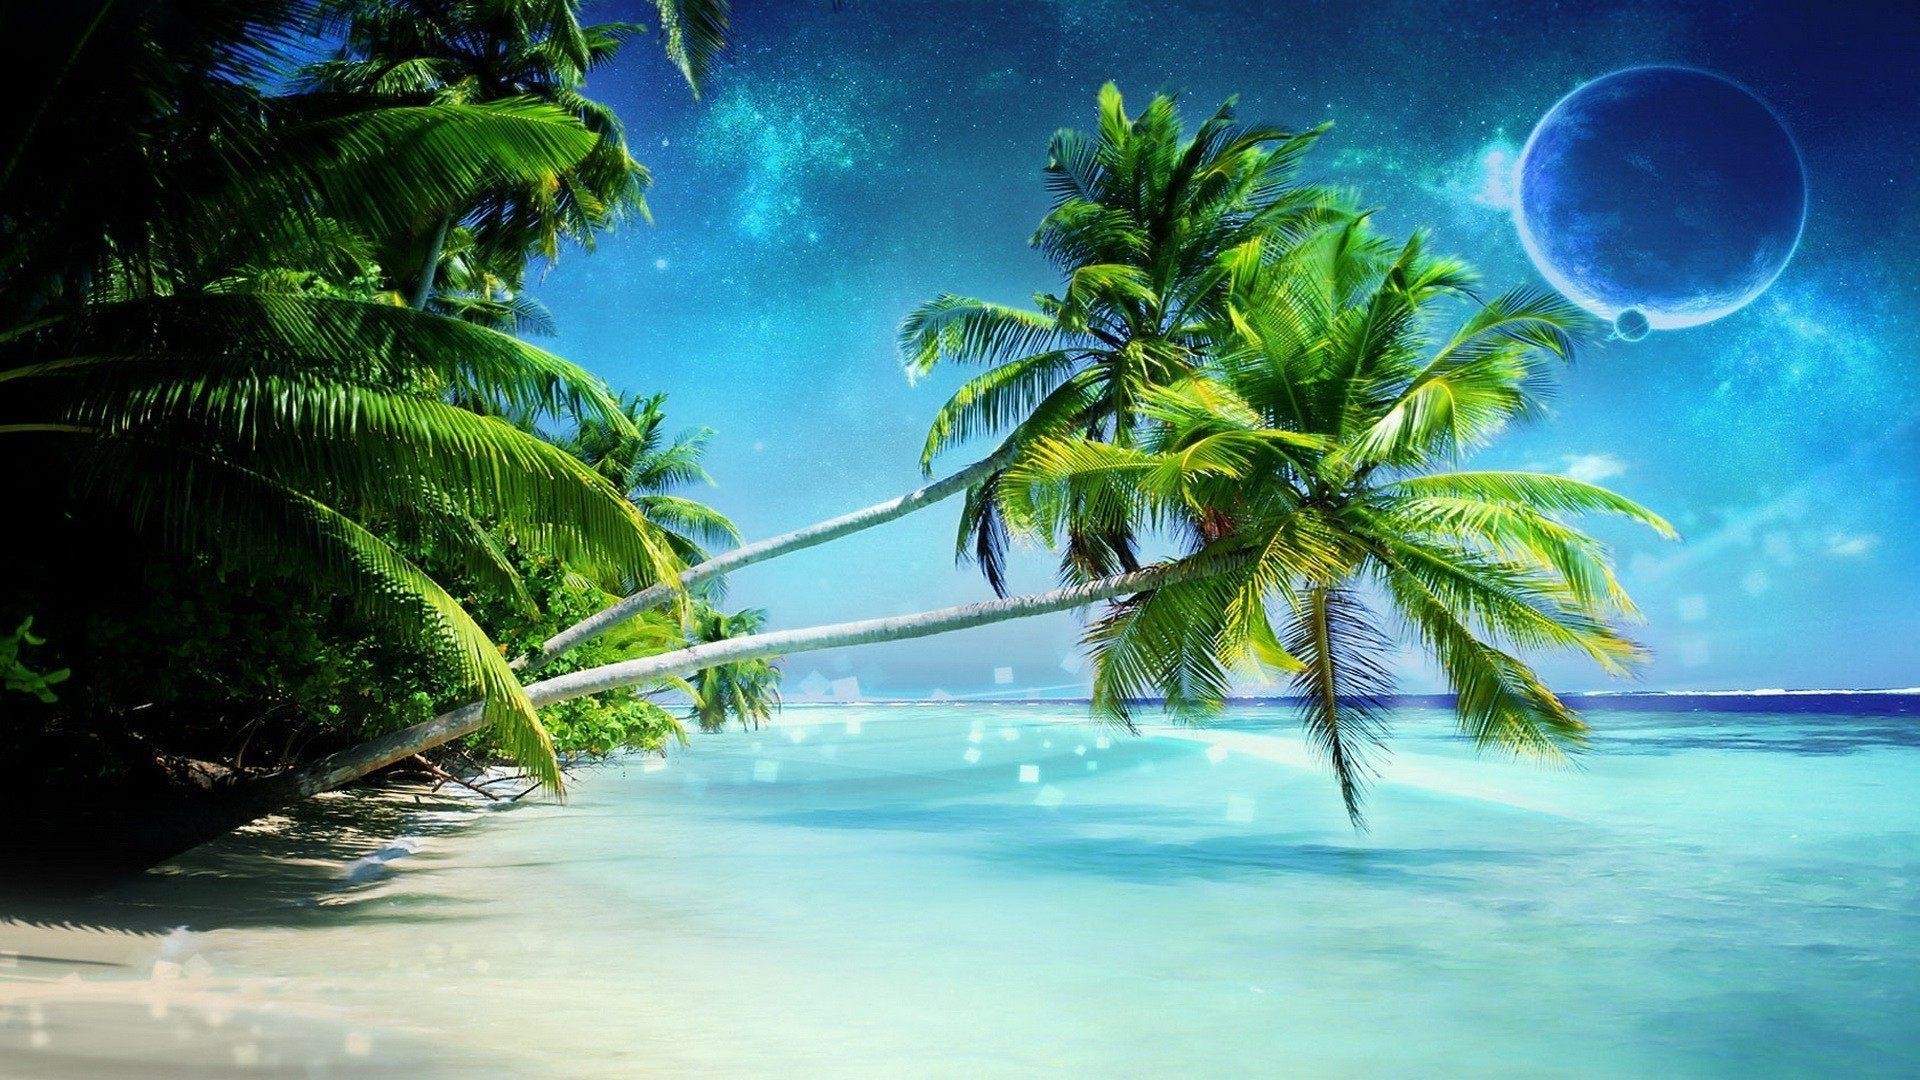 1920x1080 Tropical Beaches With Palm Trees S Wallpaper Images Is Cool Wallpapers